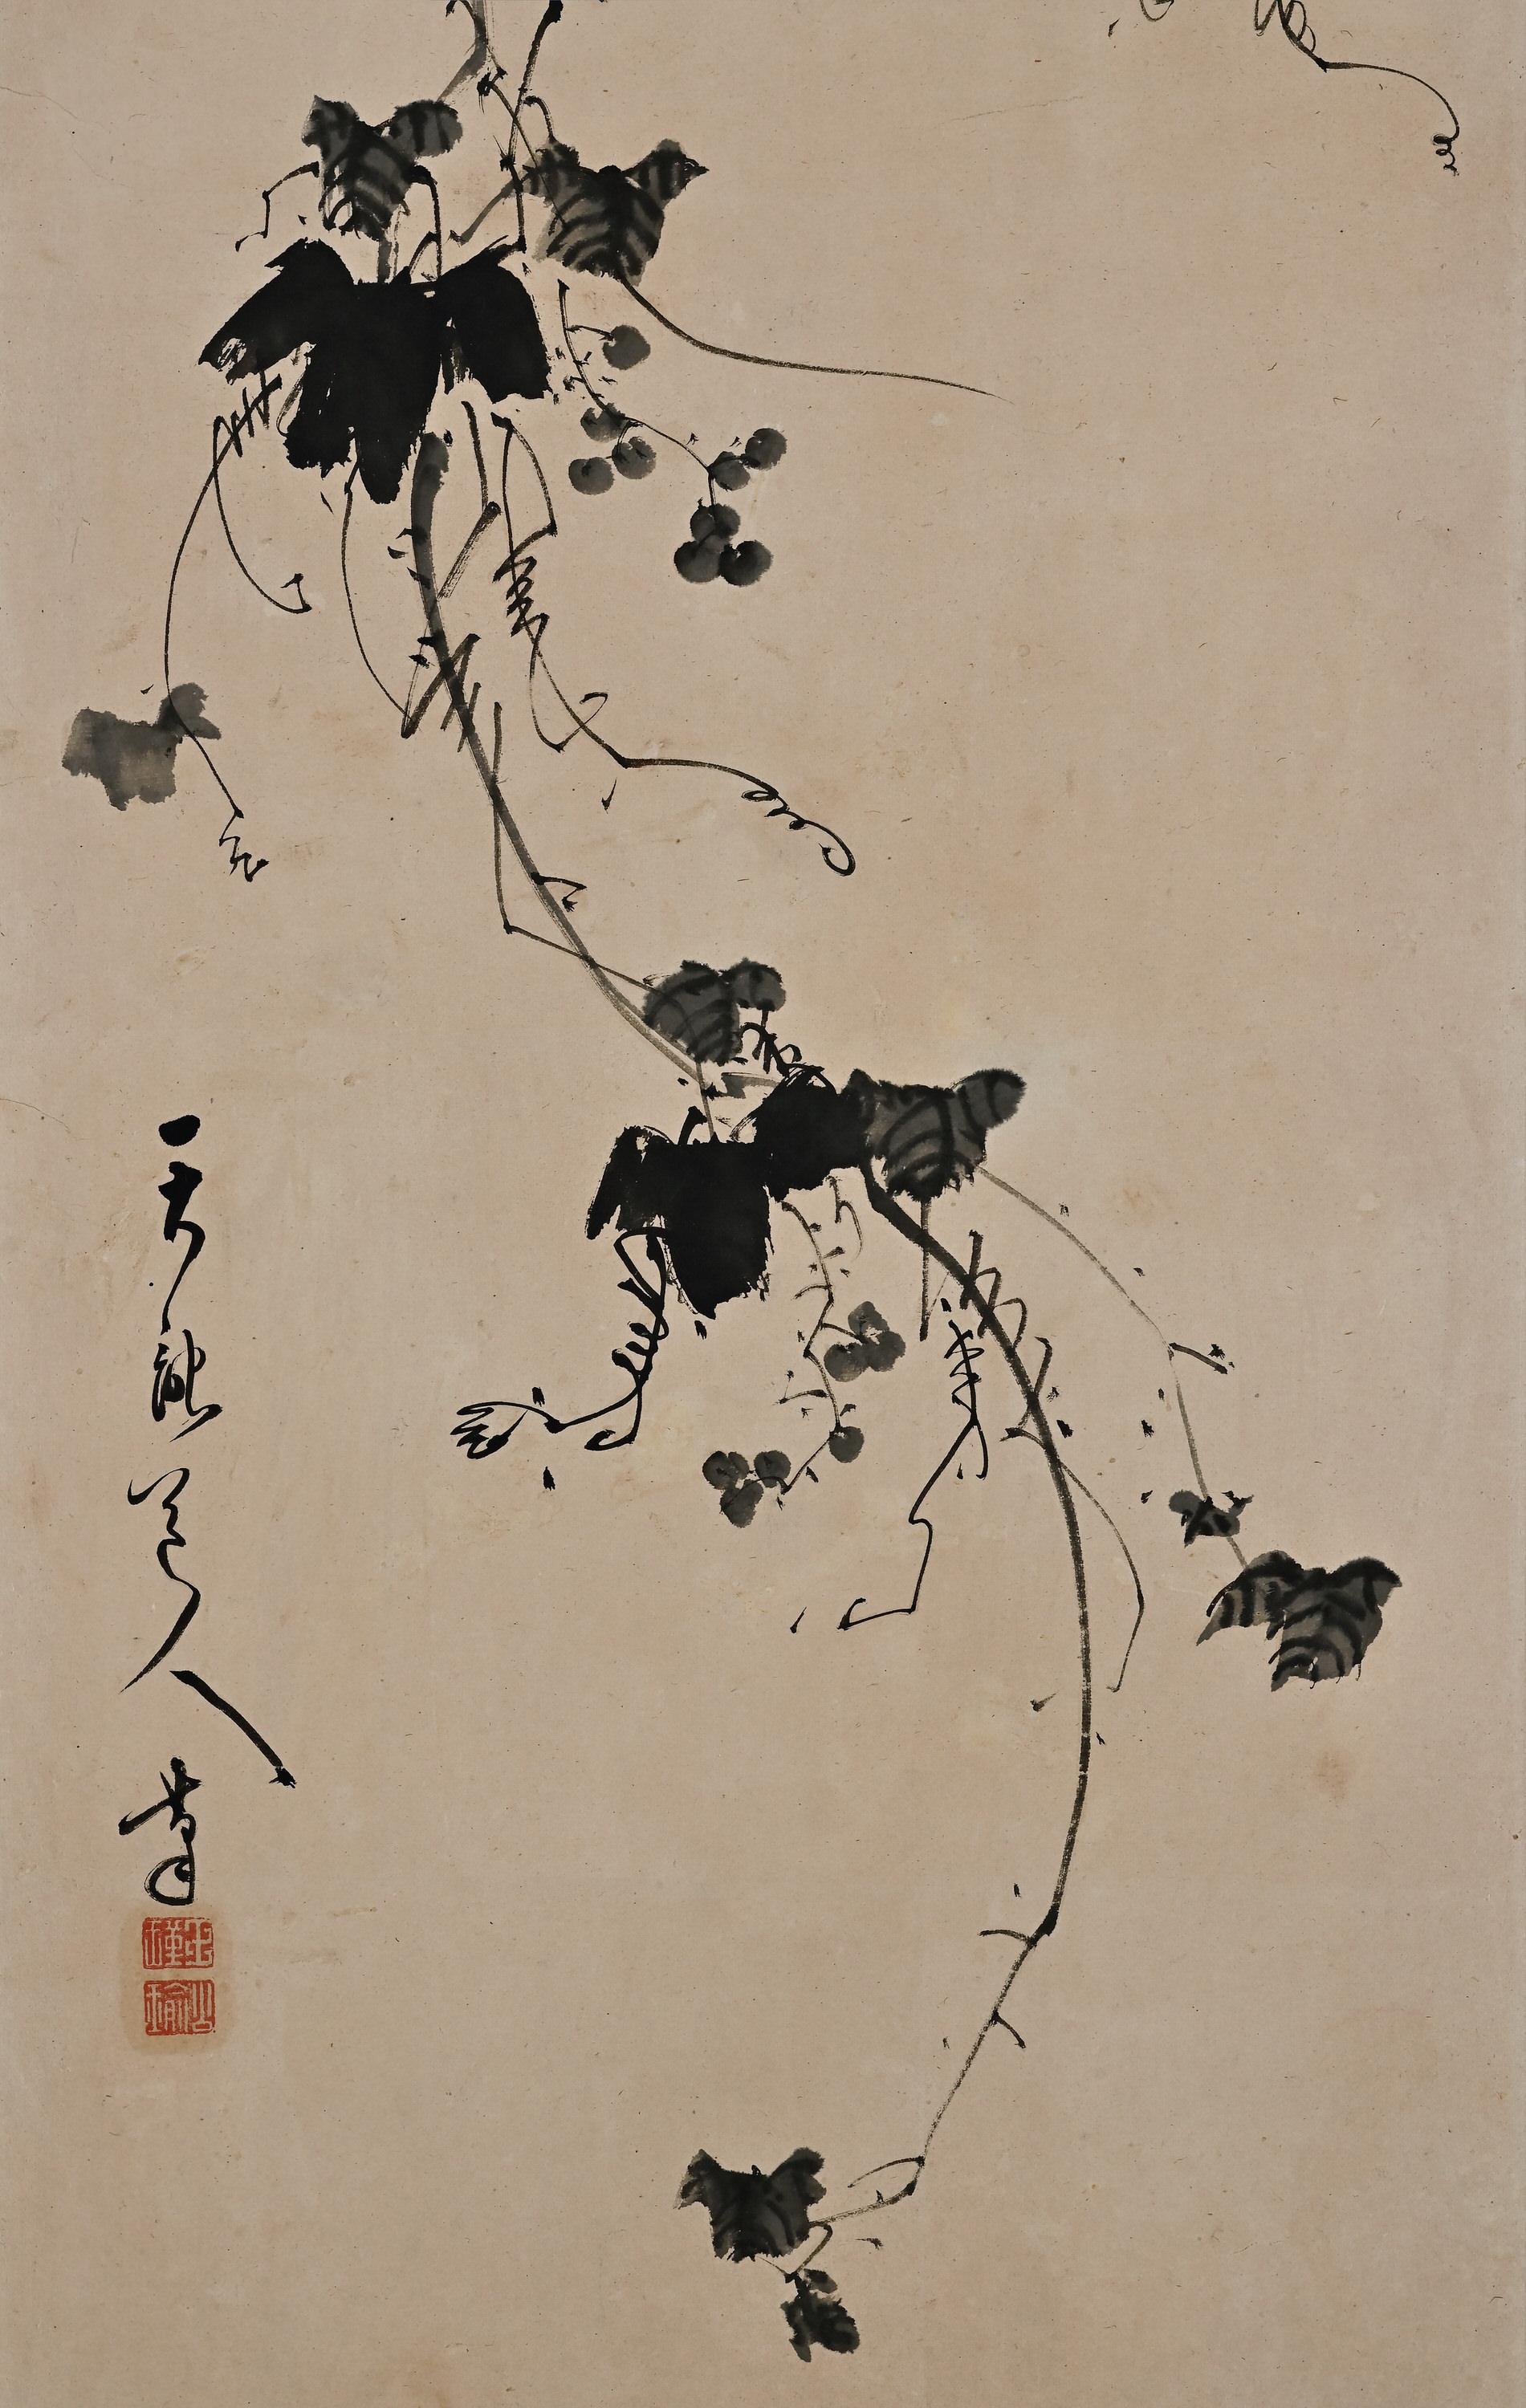 Tenryu Dojin (1718-1810)

Grapevine

Late 18th century

Framed Japanese Painting. Ink on Paper.

A framed Japanese ink painting depicting a grapevine by the well-known 18th century zen monk and artist Tenryu Dojin. Using ink tones ranging